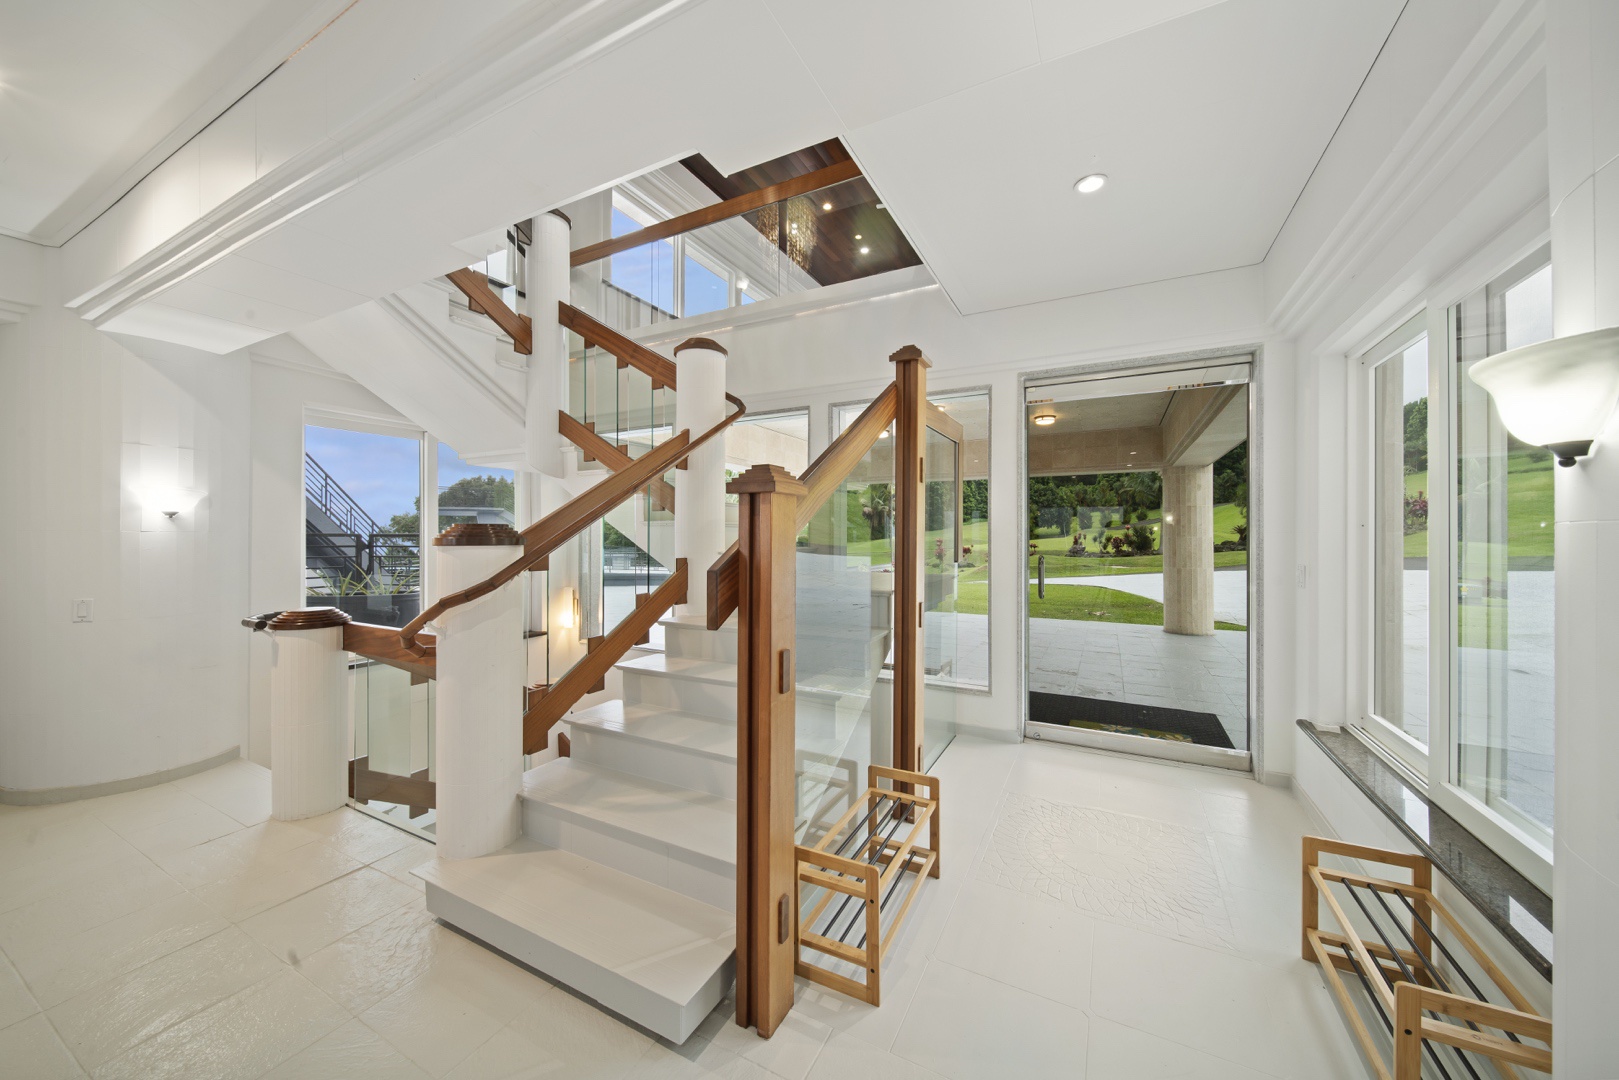 Ninole Vacation Rentals, Waterfalling Estate - Front entrance featuring spiral staircase between floors.